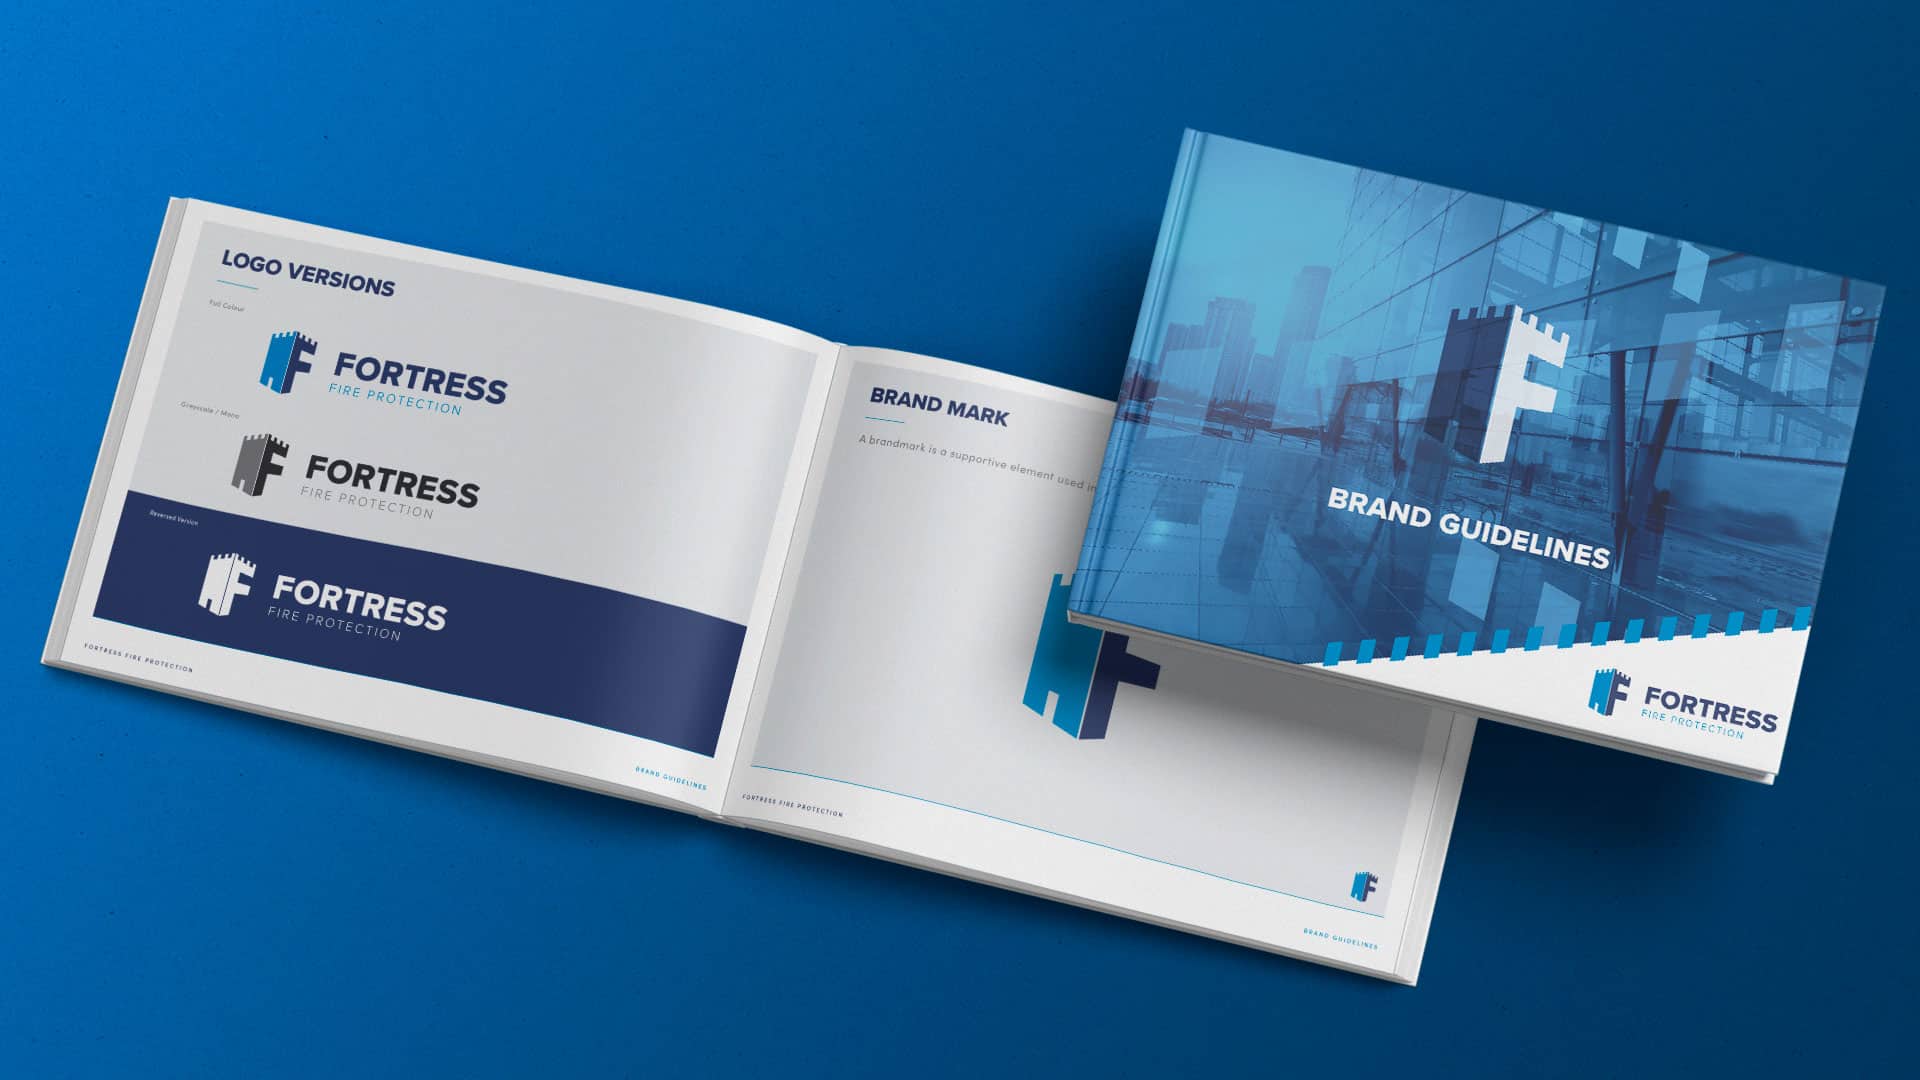 Fortress Fire brand guidelines created by Essex branding agency, Swan Creative